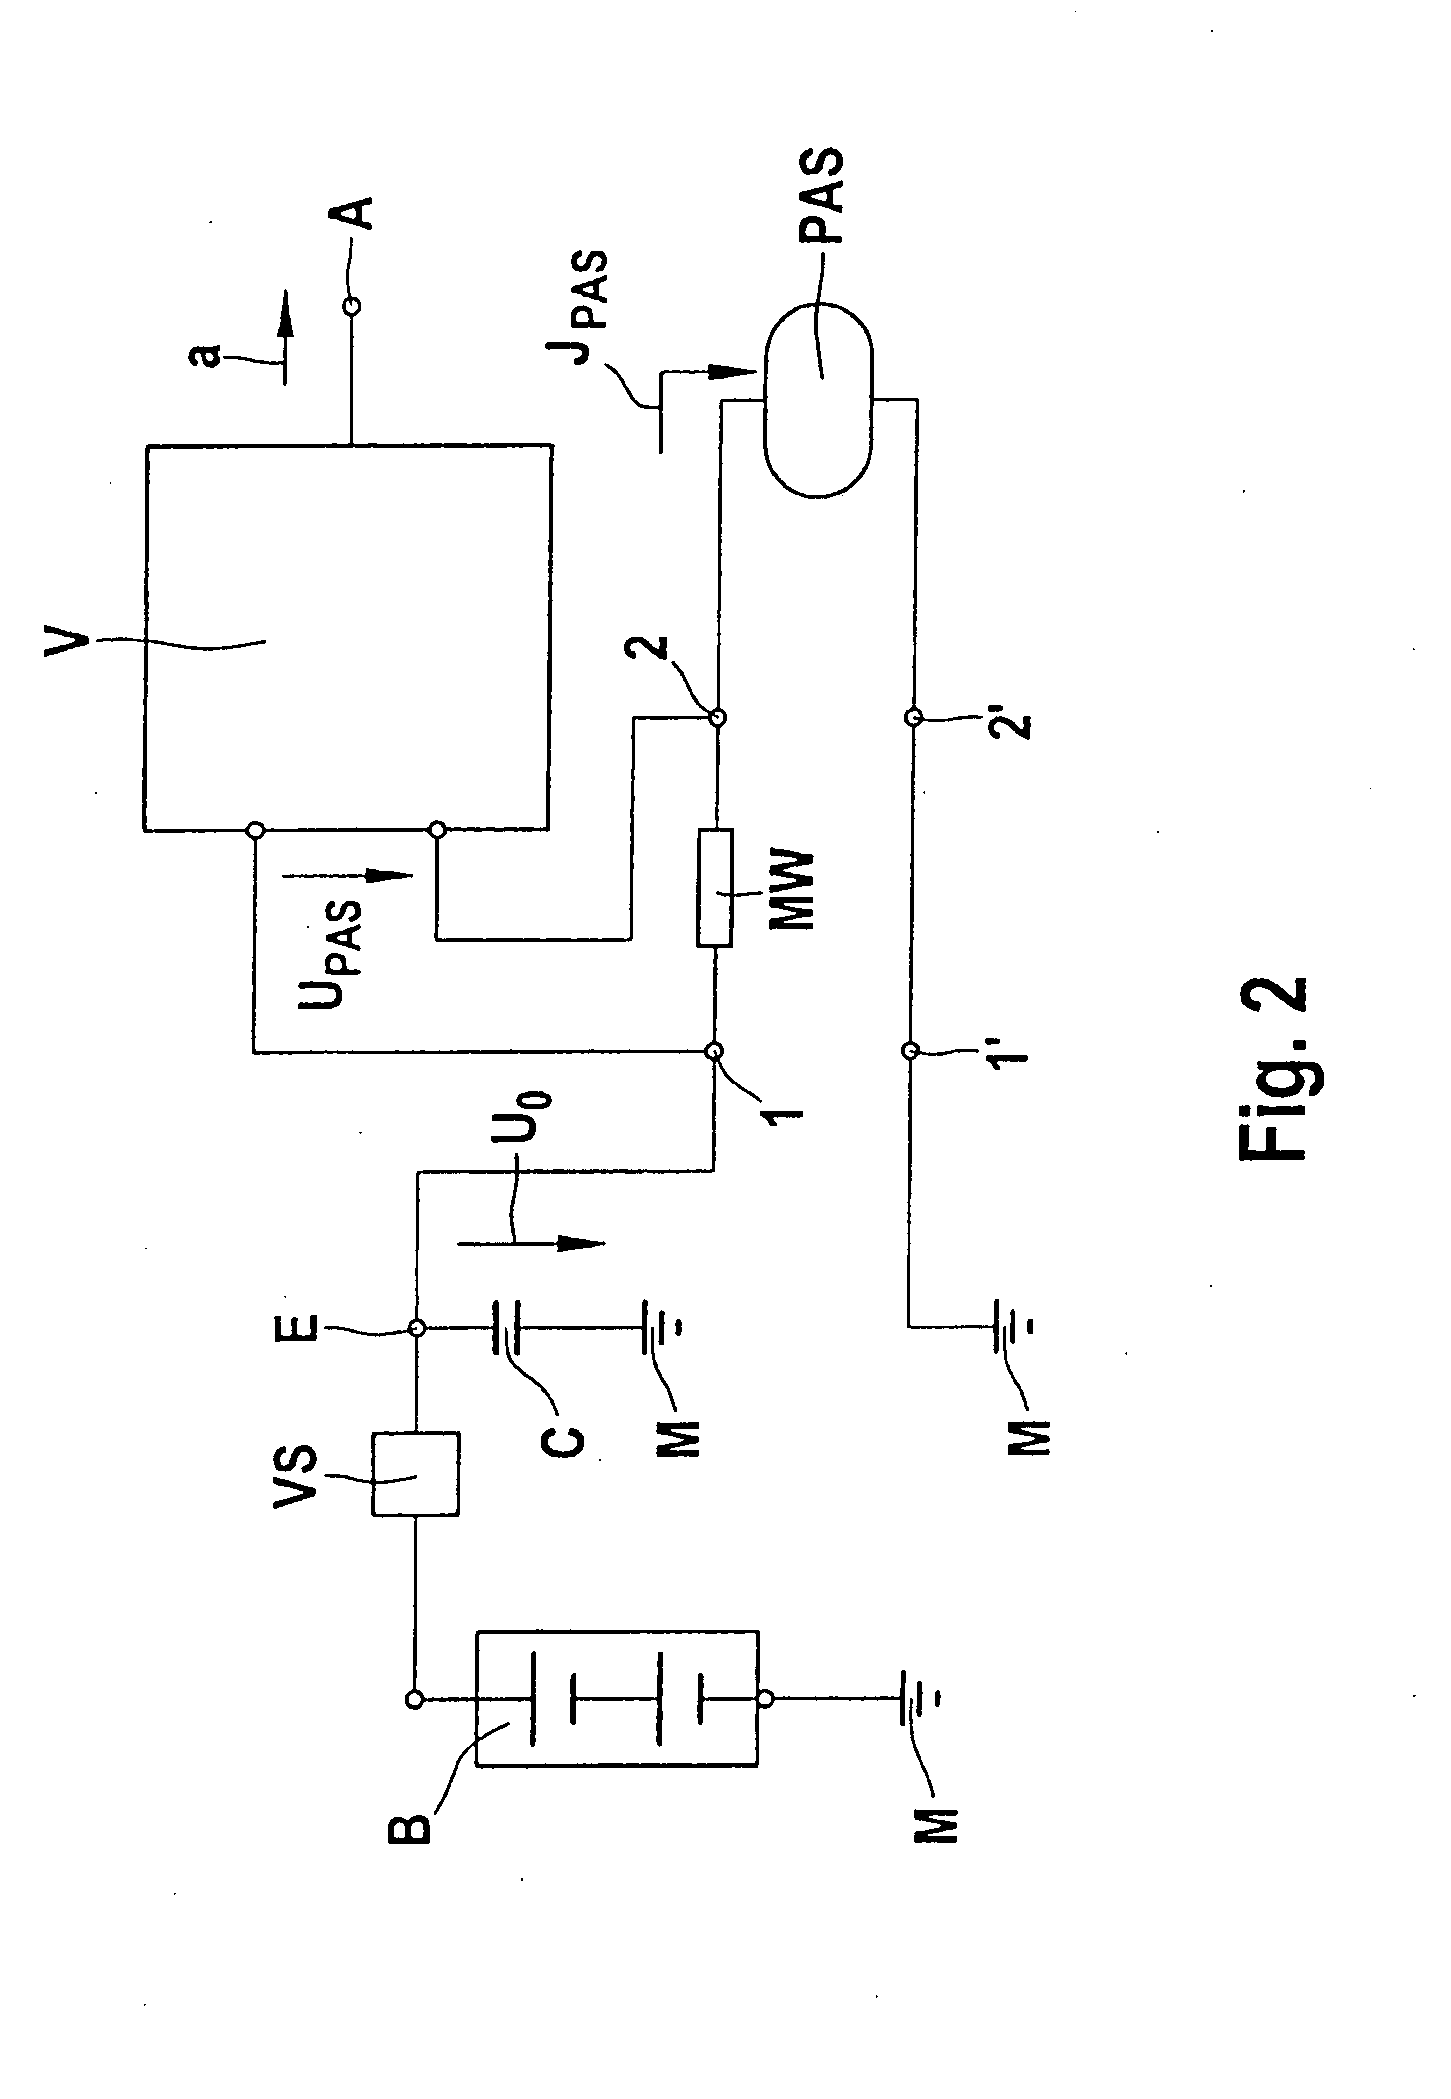 Sensor interface with integrated current measurement